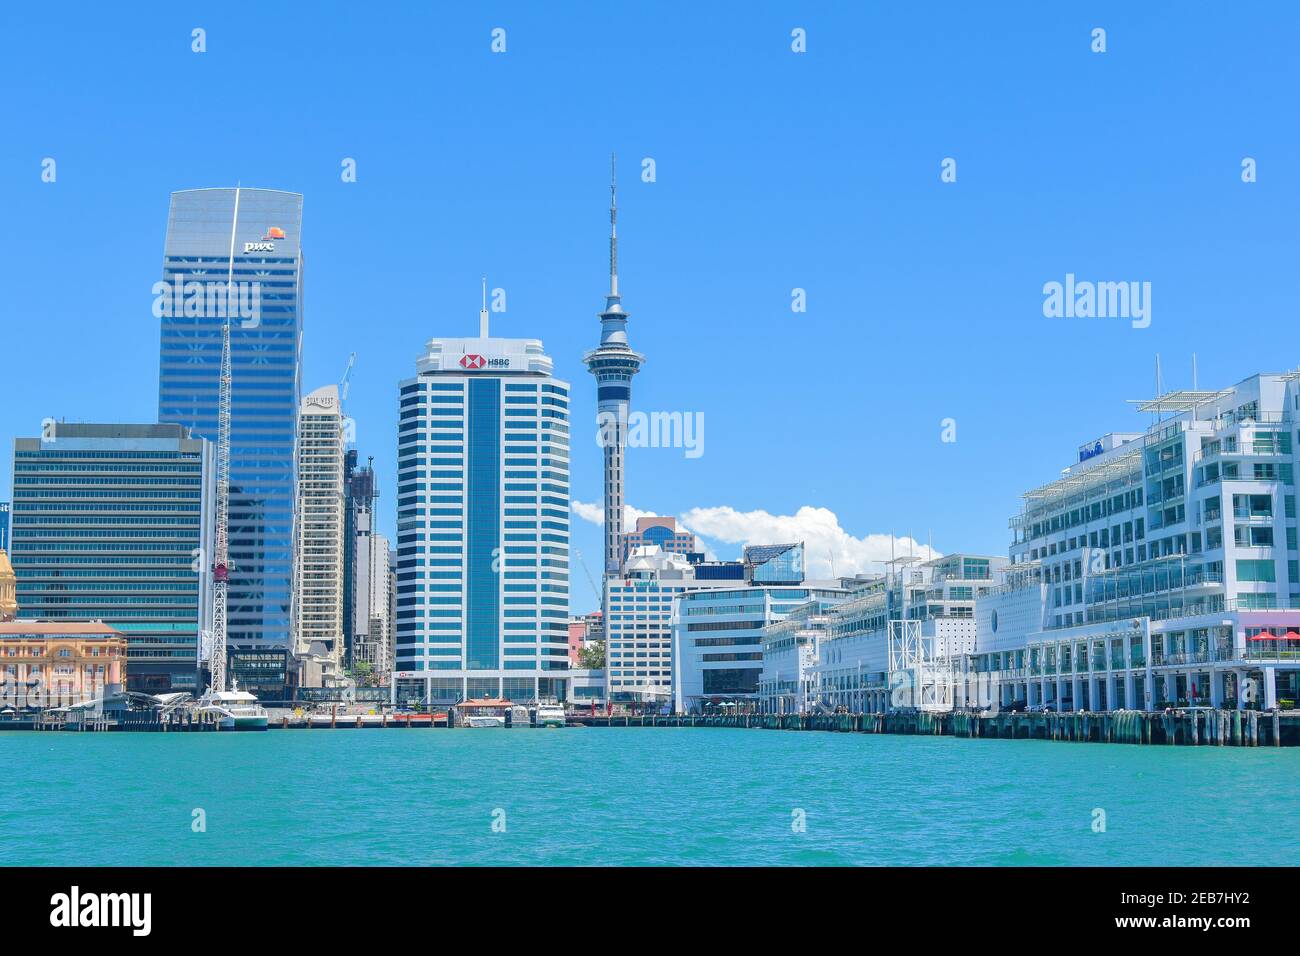 AUCKLAND, NEW ZEALAND - Jan 05, 2021: View of Auckland downtown skyline  with new Pwc and Hsbc buildings Stock Photo - Alamy